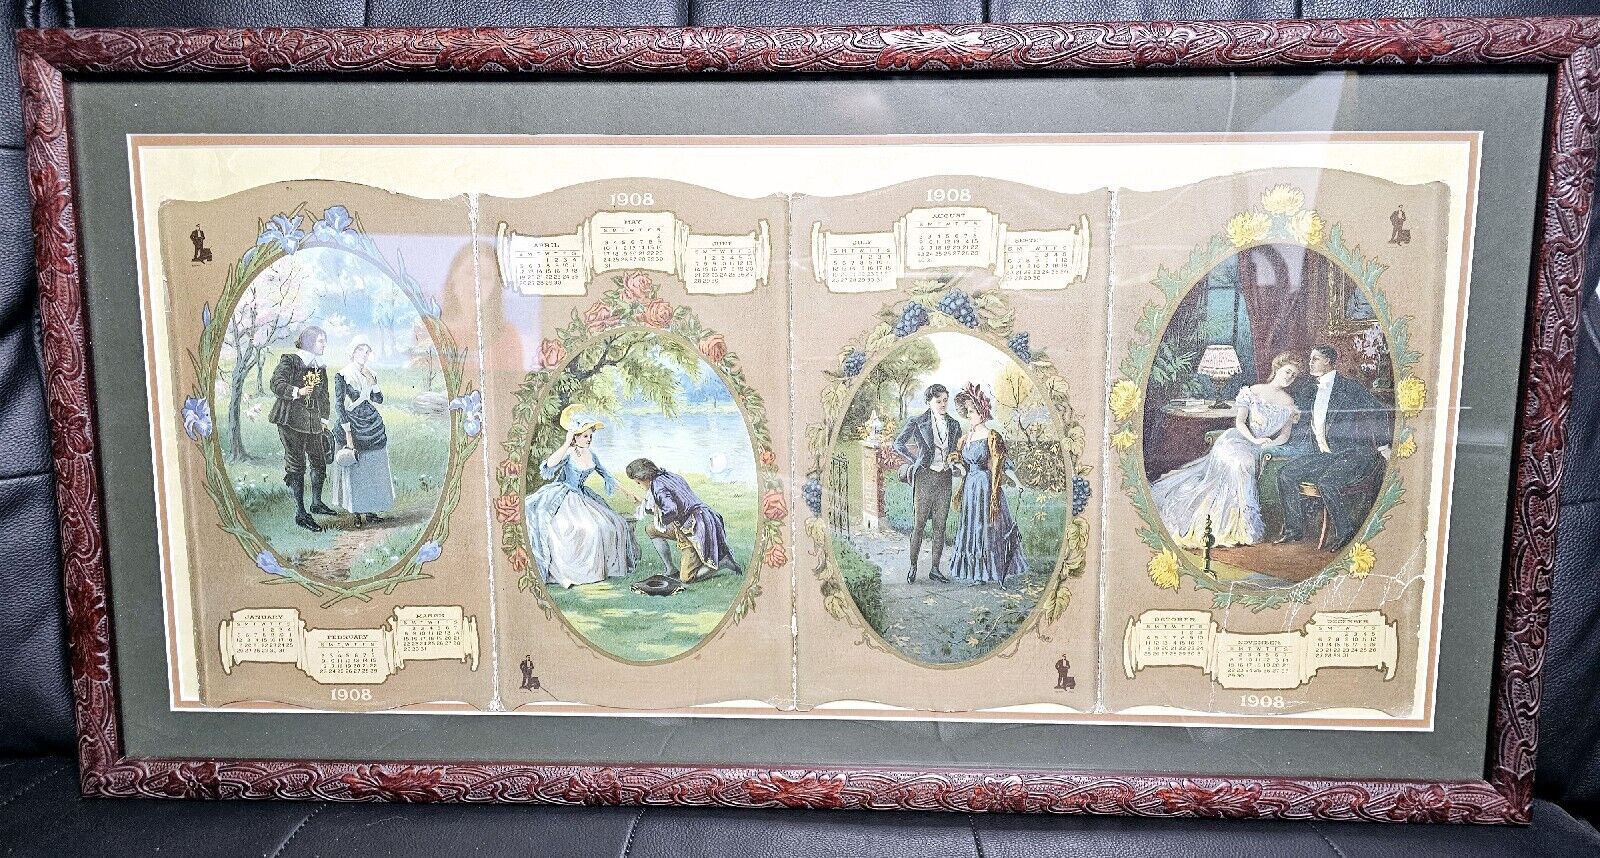 Antique 1908 Young Couples Lithograph Advertising Calendar Beautiful Frame.